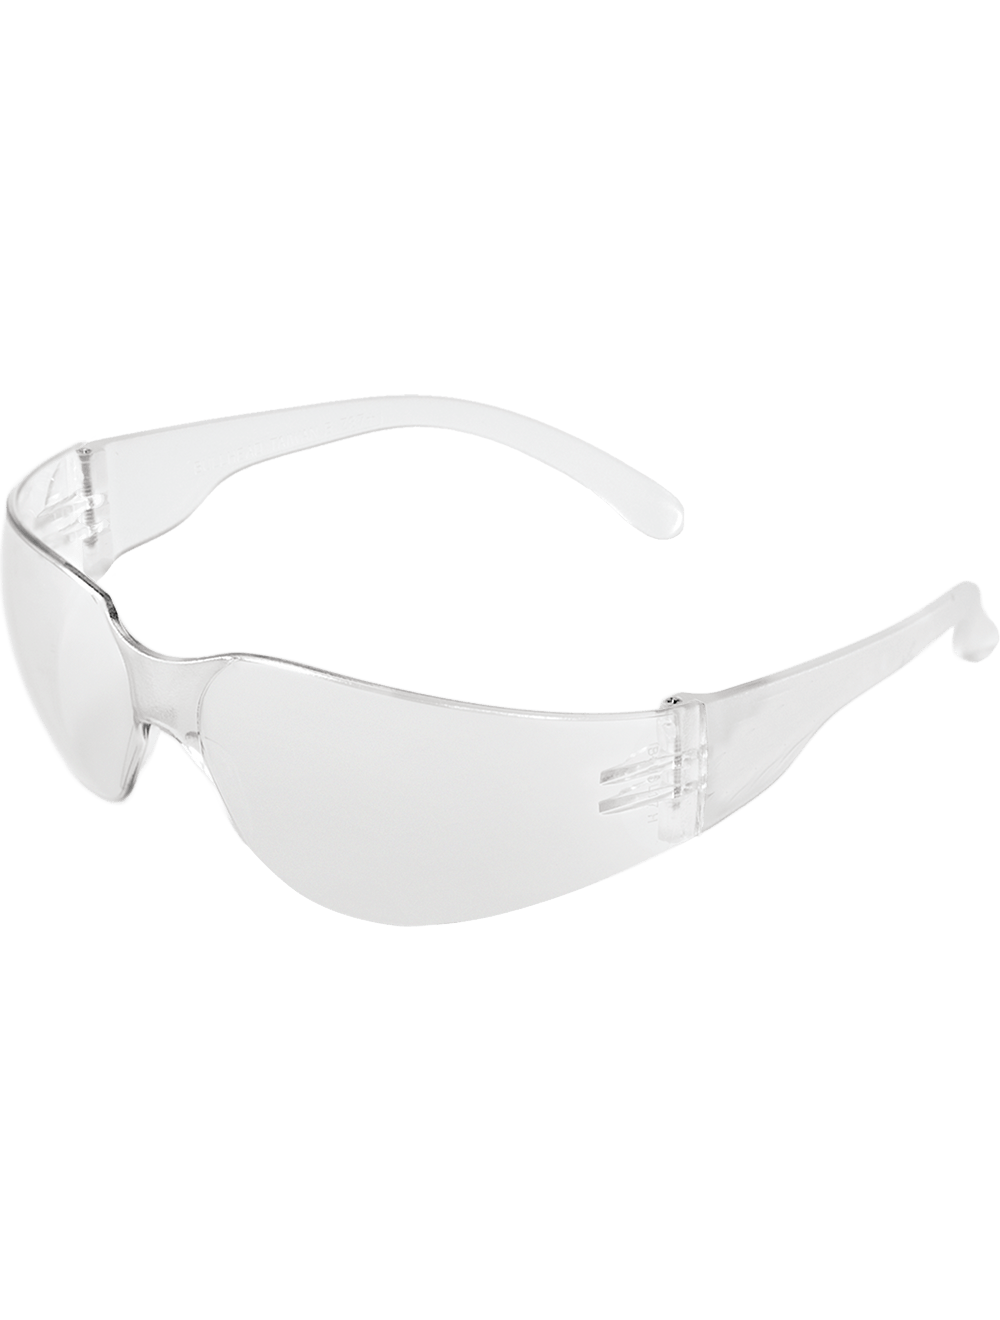 Torrent™ Clear Lens, Frosted Clear Frame Safety Glasses - BH111 Bullhead  Safety Eyewear, Cooling Safety, Heat Stress Safety, Work at Height Safety,  Hearing Safety